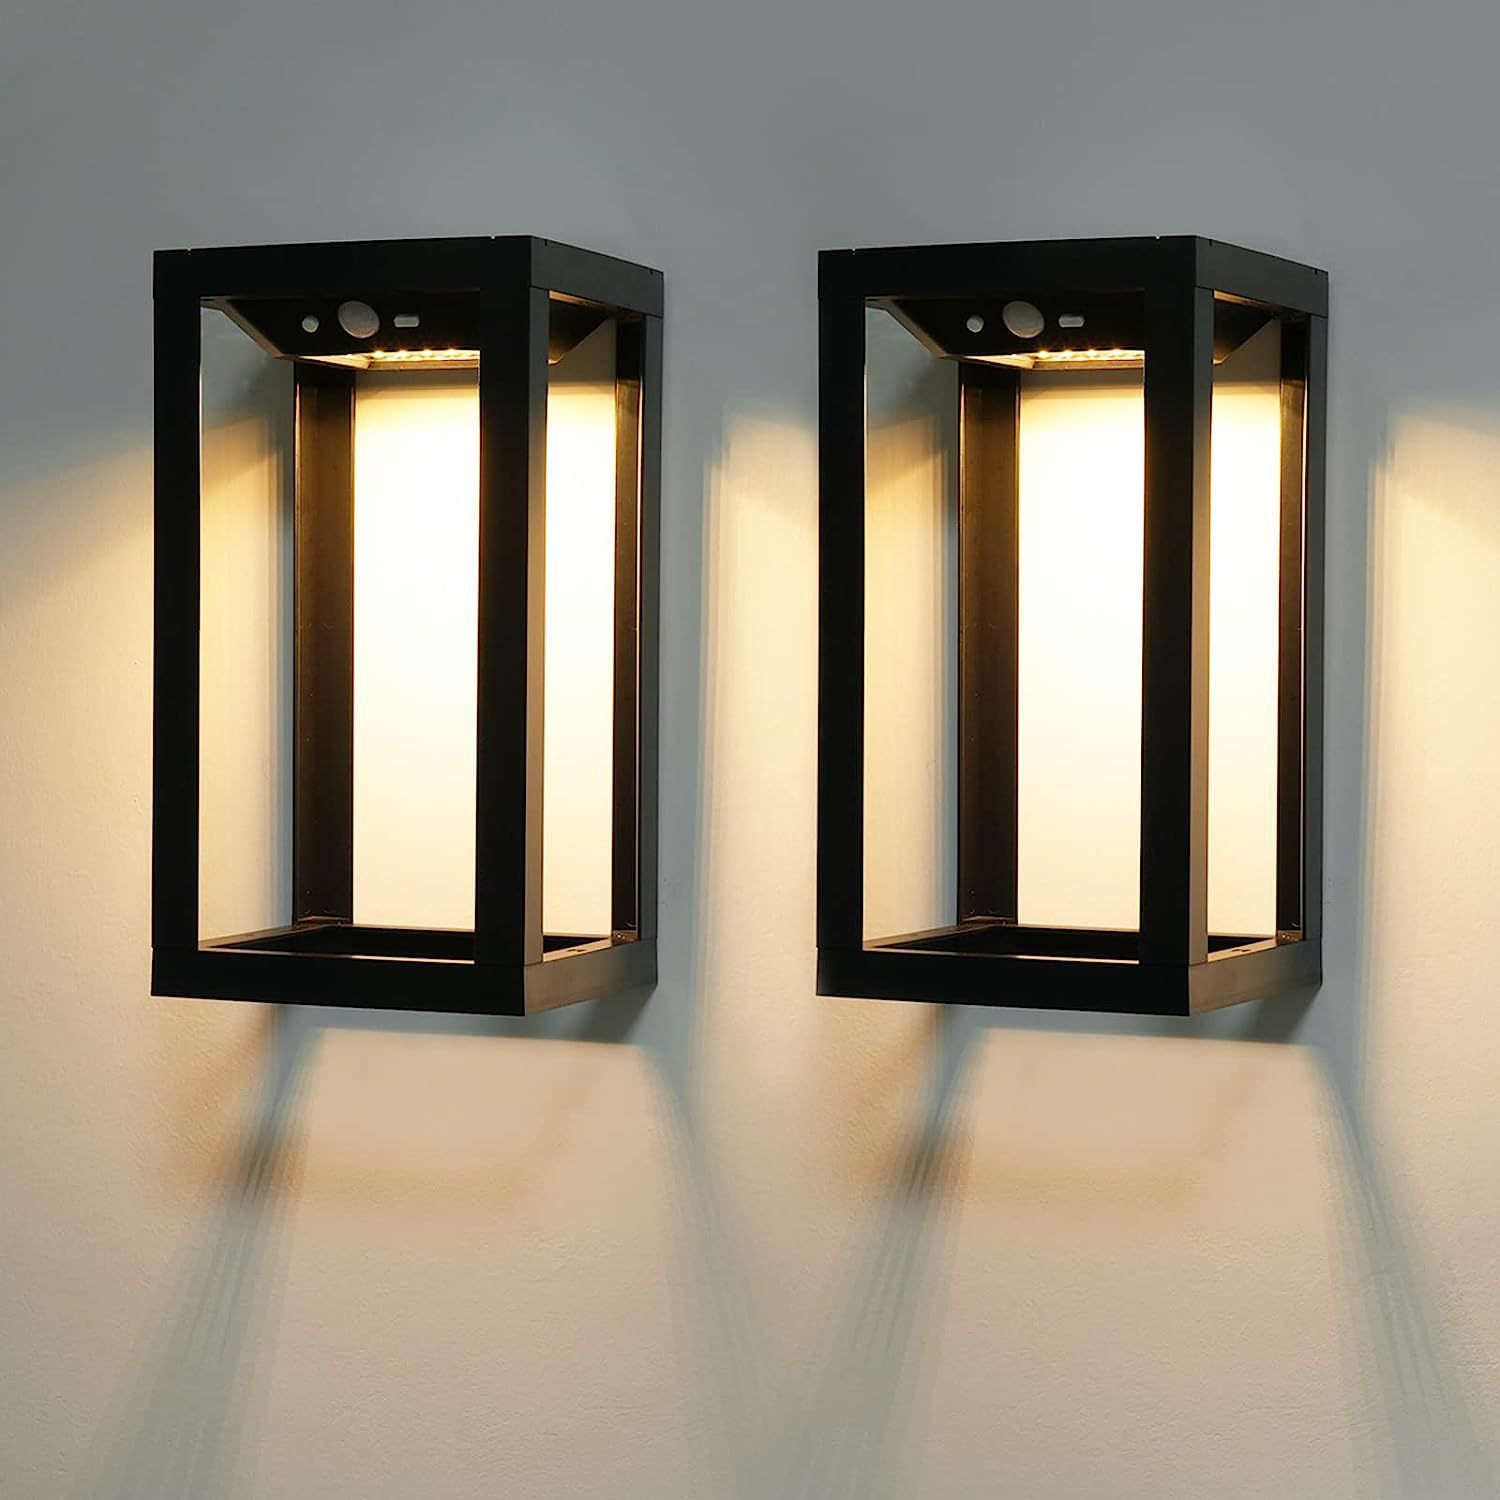 Two-color luminaire